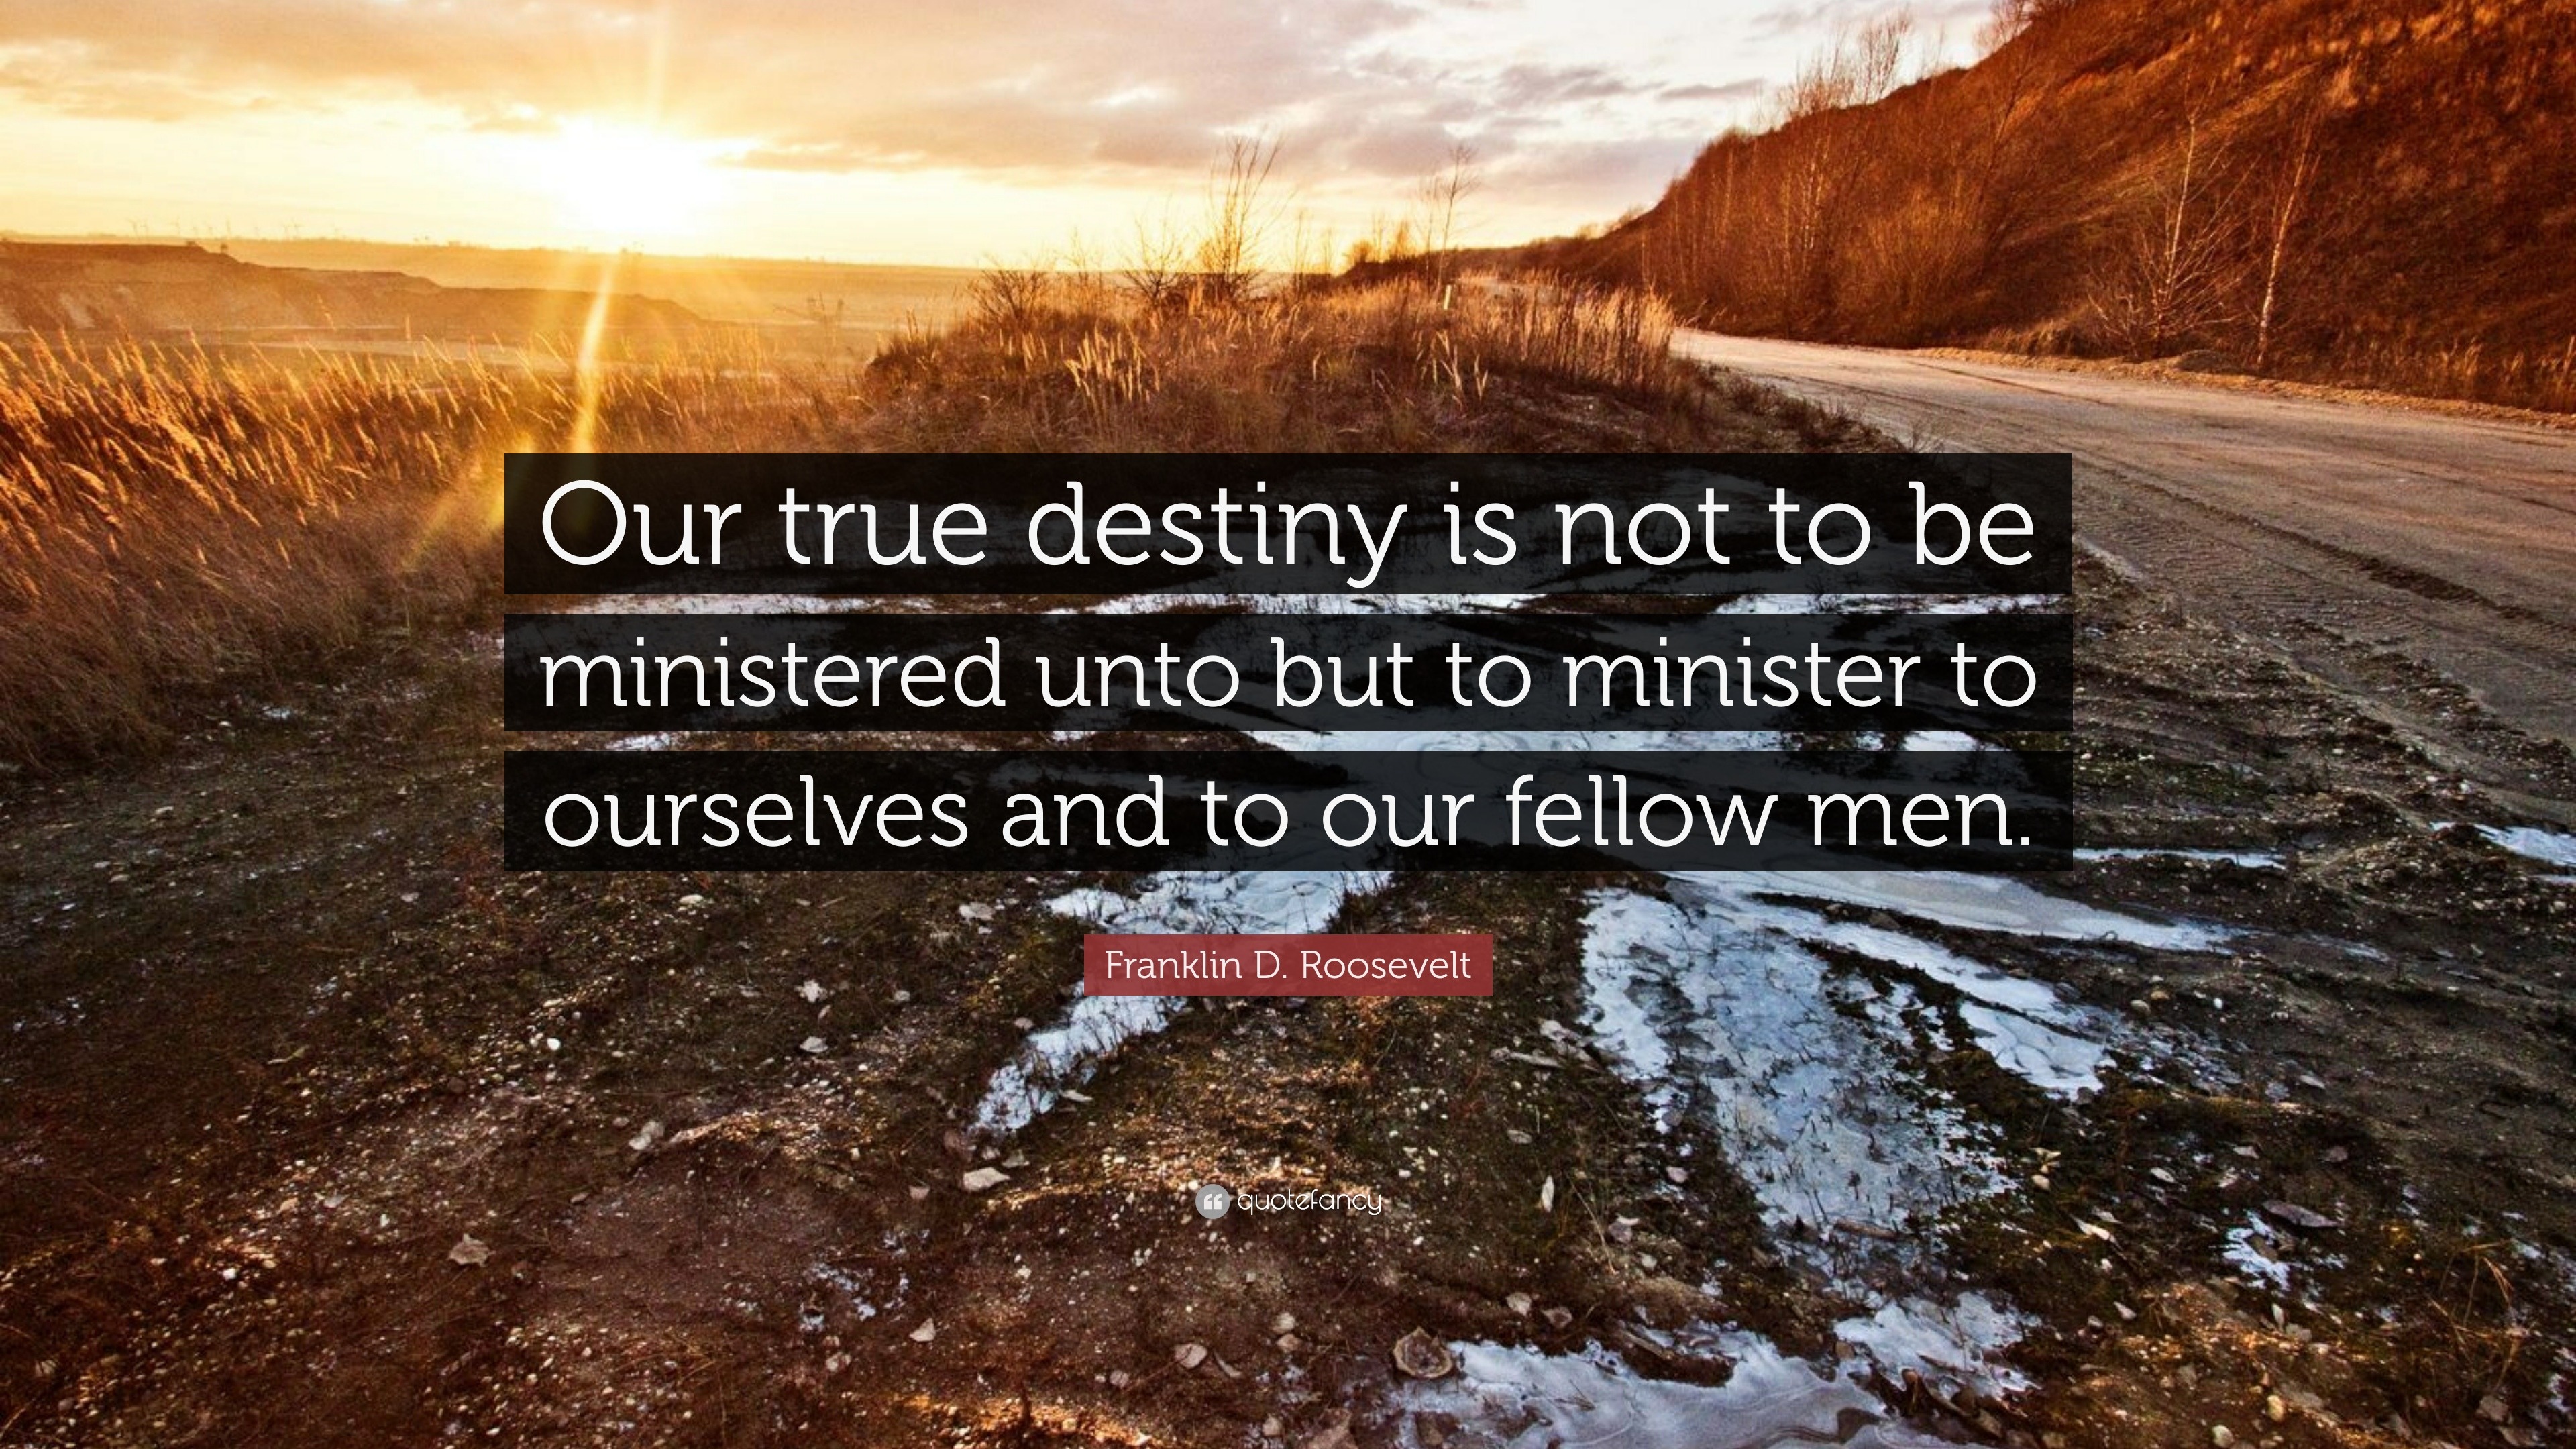 Franklin D Roosevelt Quote “Our true destiny is not to be ministered unto